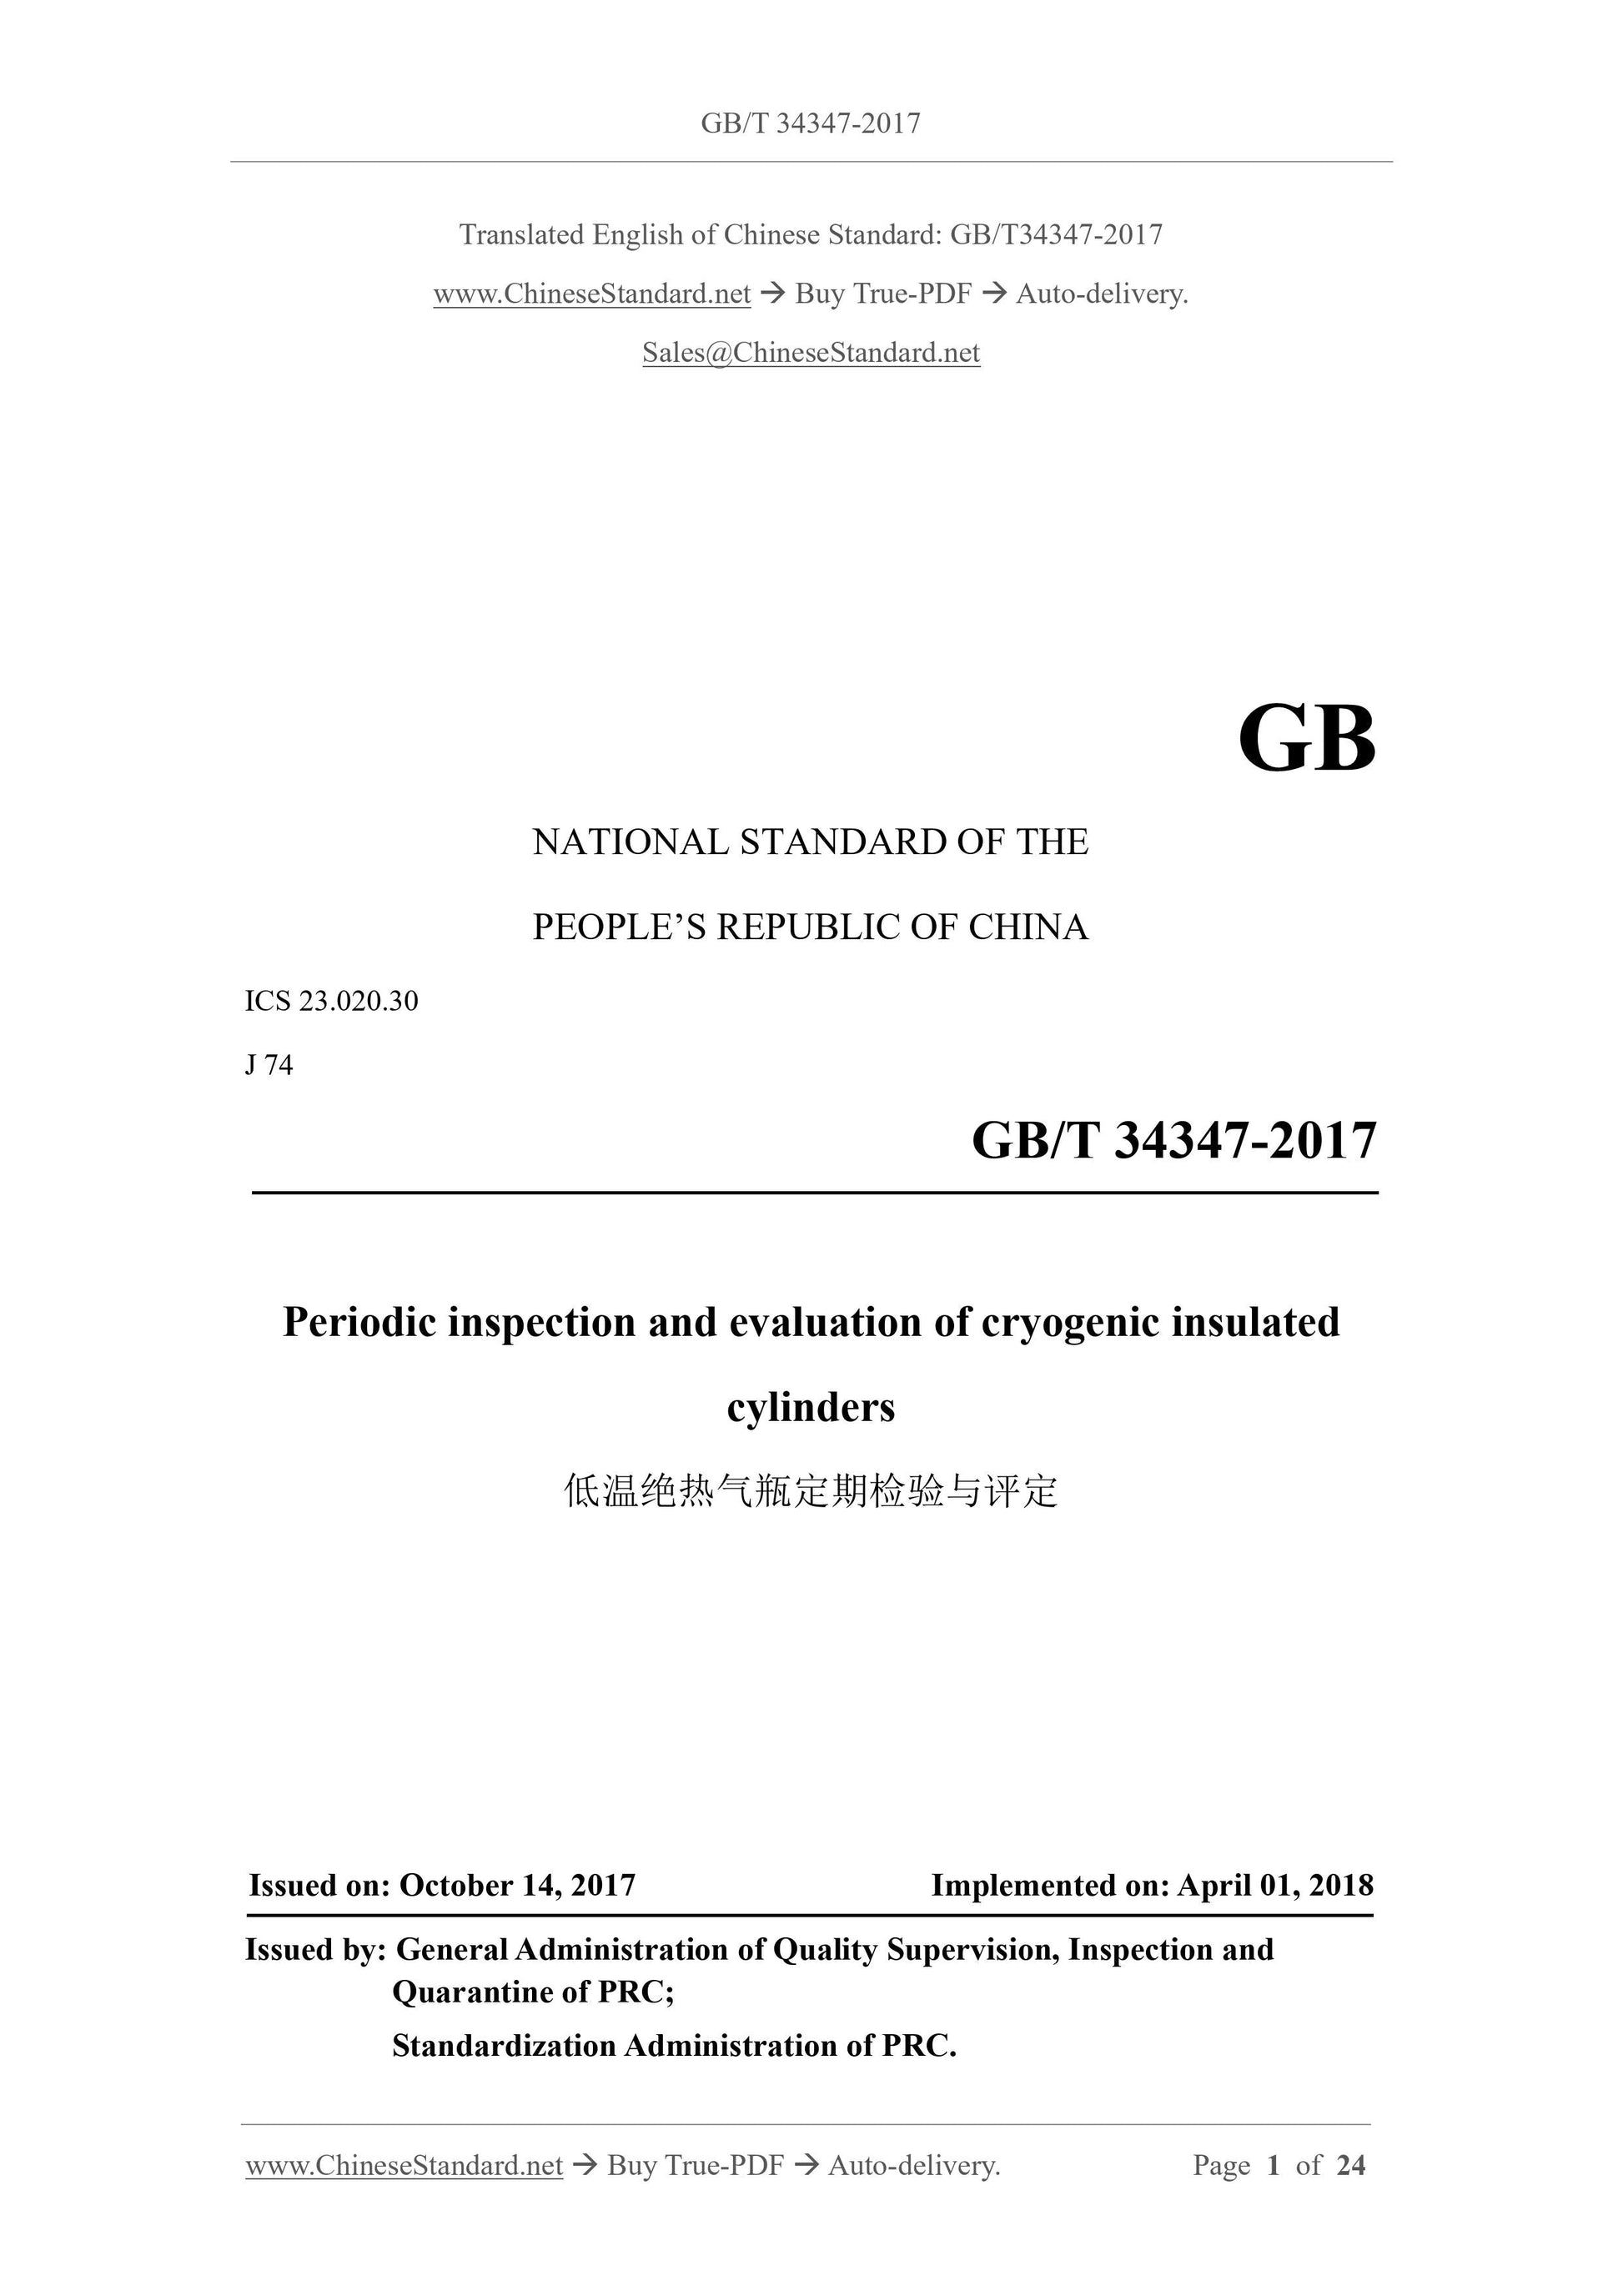 GB/T 34347-2017 Page 1